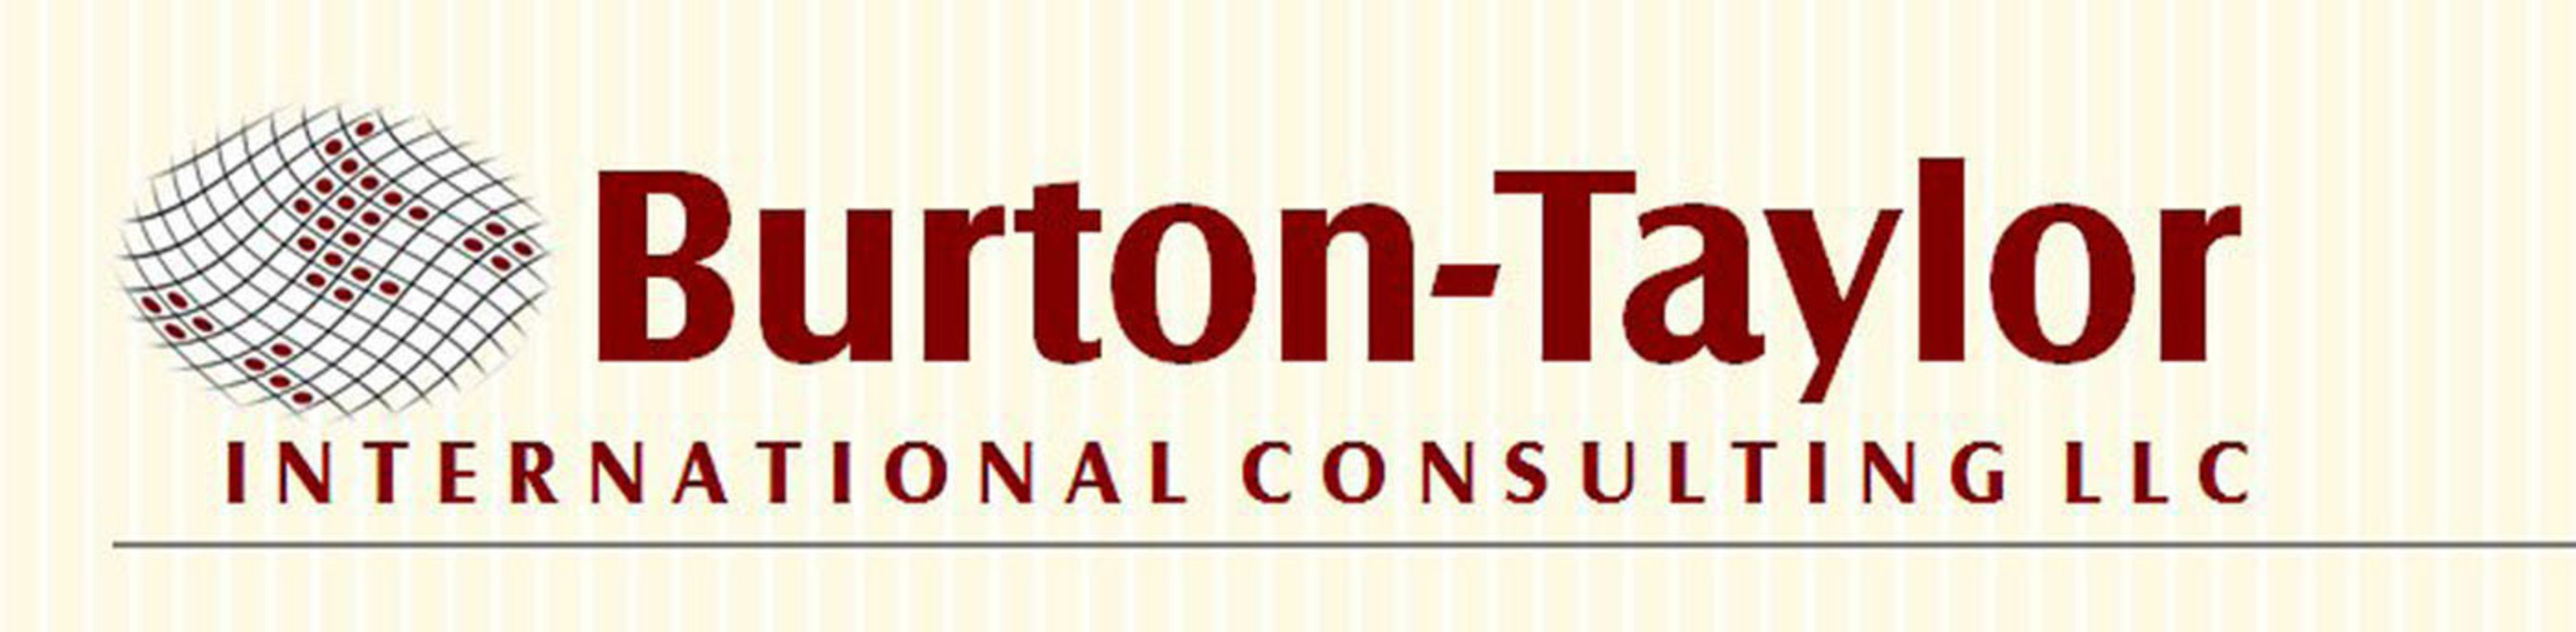 Burton-Taylor International Consulting LLC is a recognized leader in information industry market research, strategy and business consulting. Burton-Taylor market share figures are seen as standards globally. Burton-Taylor clients command an estimated 80% of global revenue share in the market data space and include the world's largest information providers, the world's biggest exchange groups, key government organizations and regulatory bodies on multiple continents, the largest advisory firms serving the...